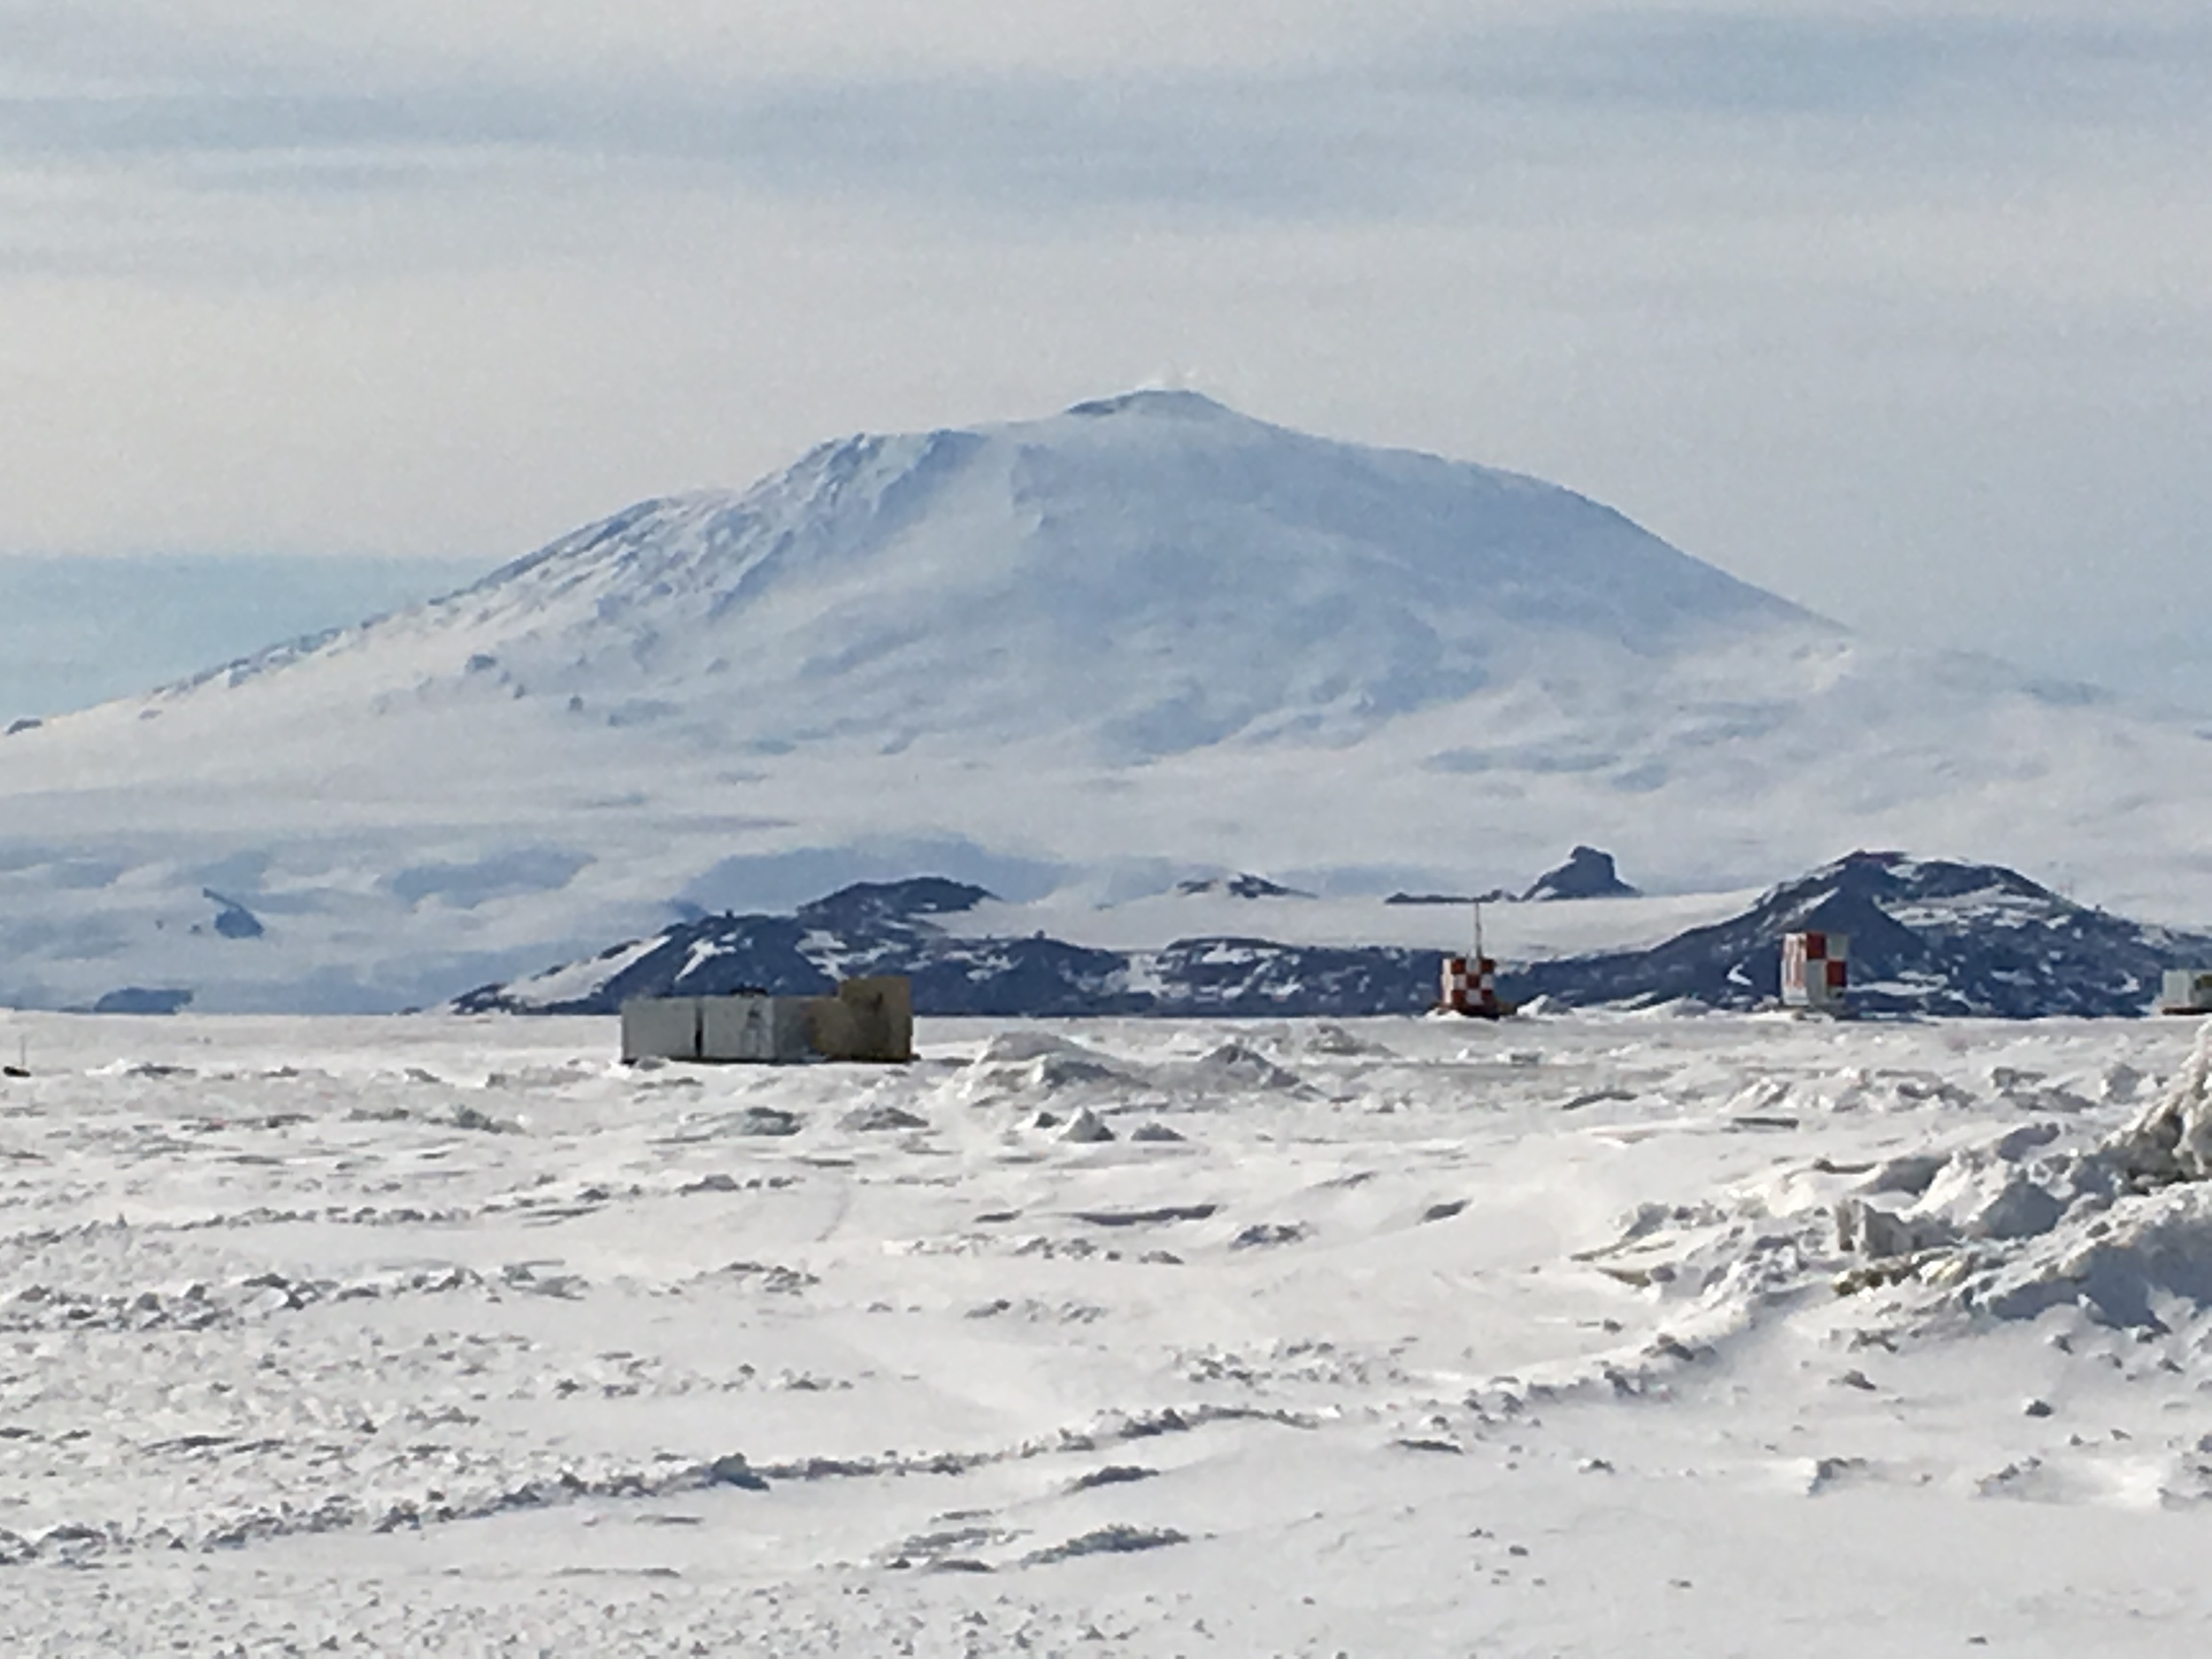  View of Mt. Erebus, the world's southernmost active volcano, with Pegasus Field (one of the two McMurdo airstrips) in the foreground. 